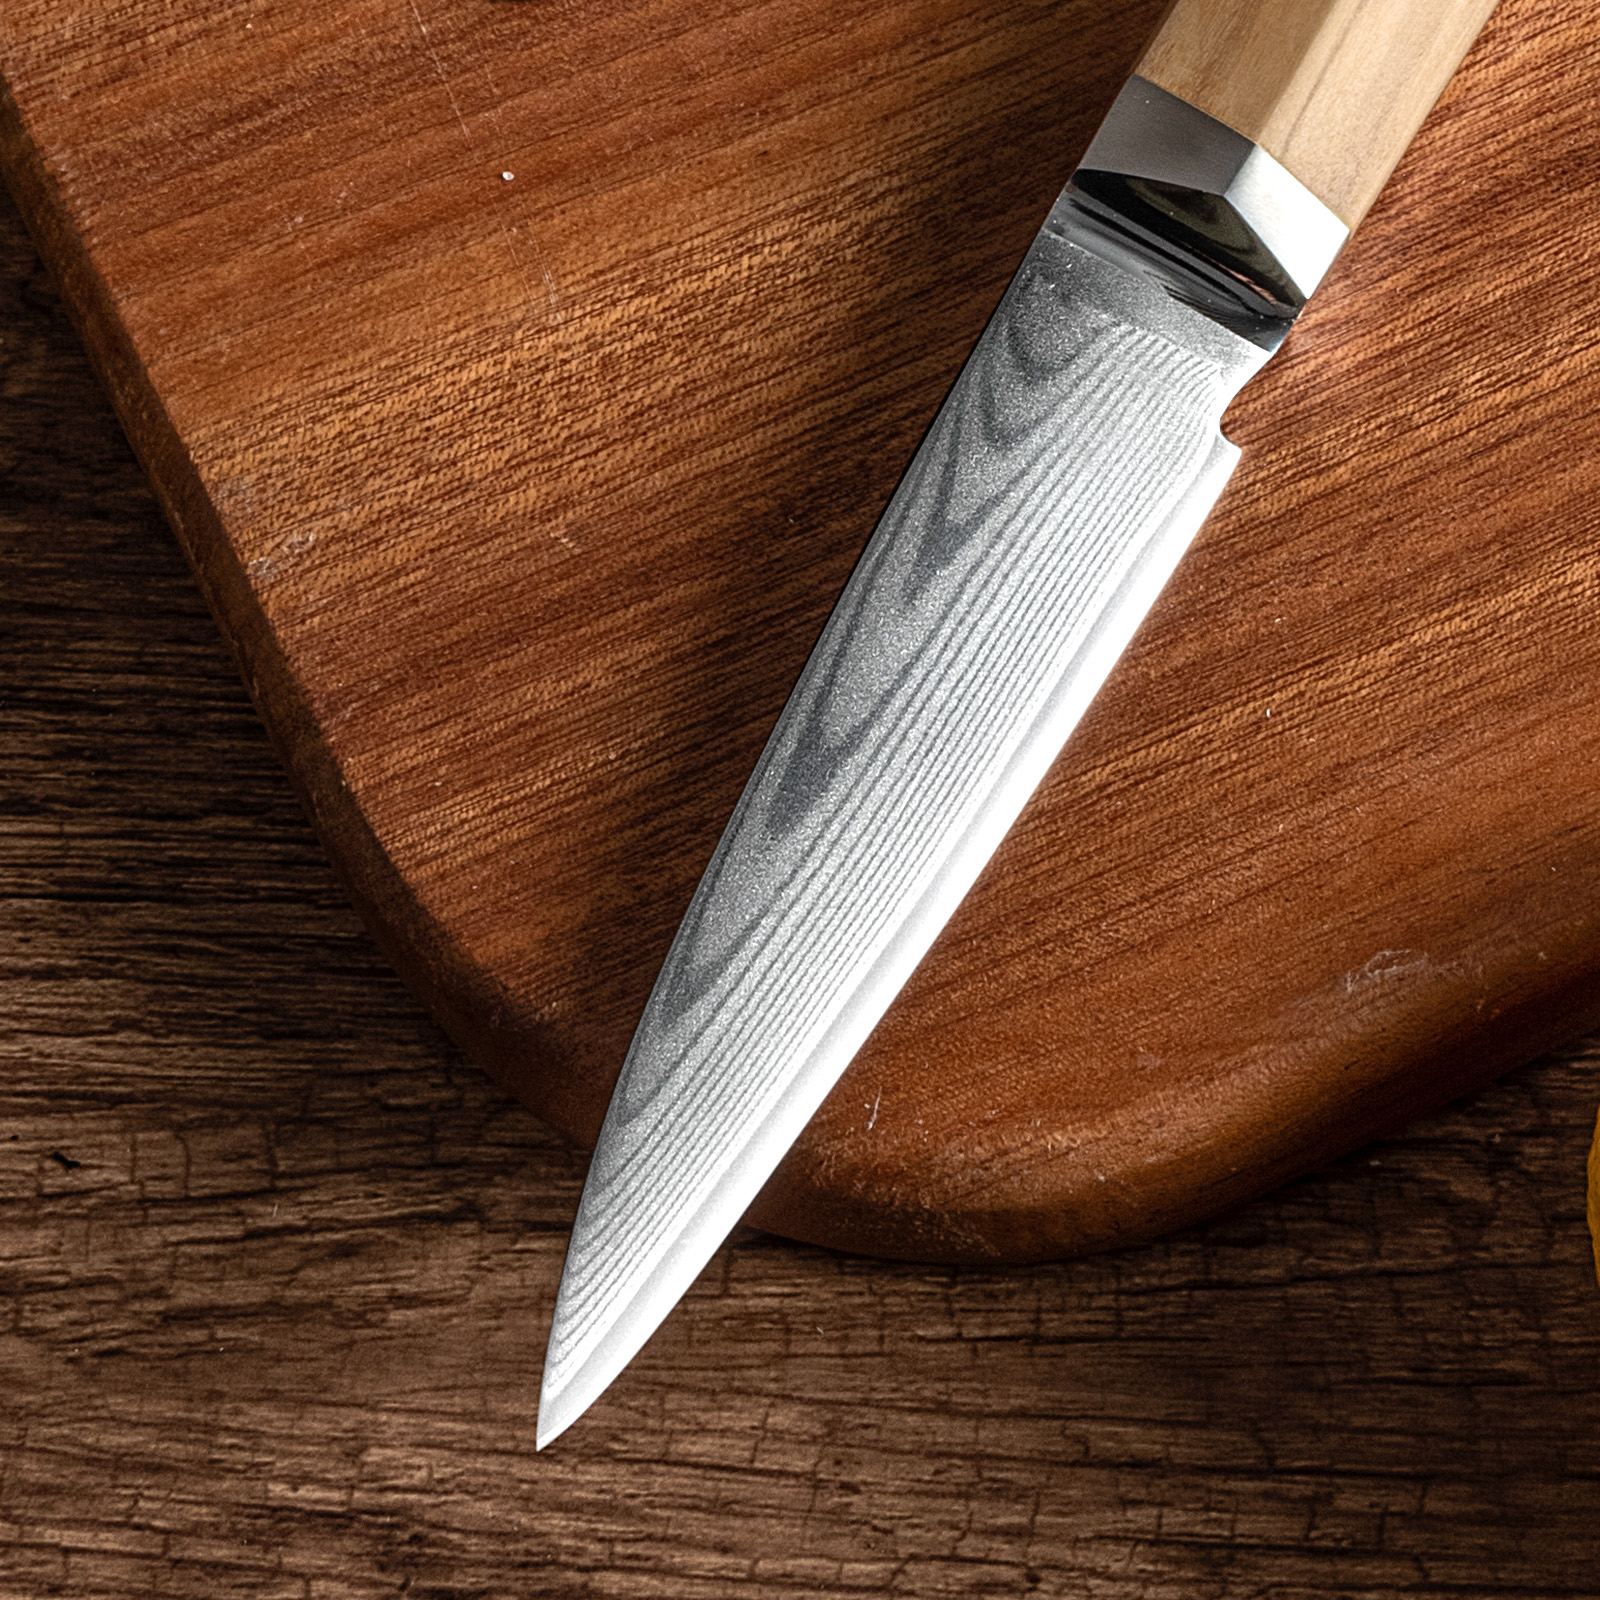 Damascus Paring Knife 3.5 inch-FYW Series – yarenh flagship store